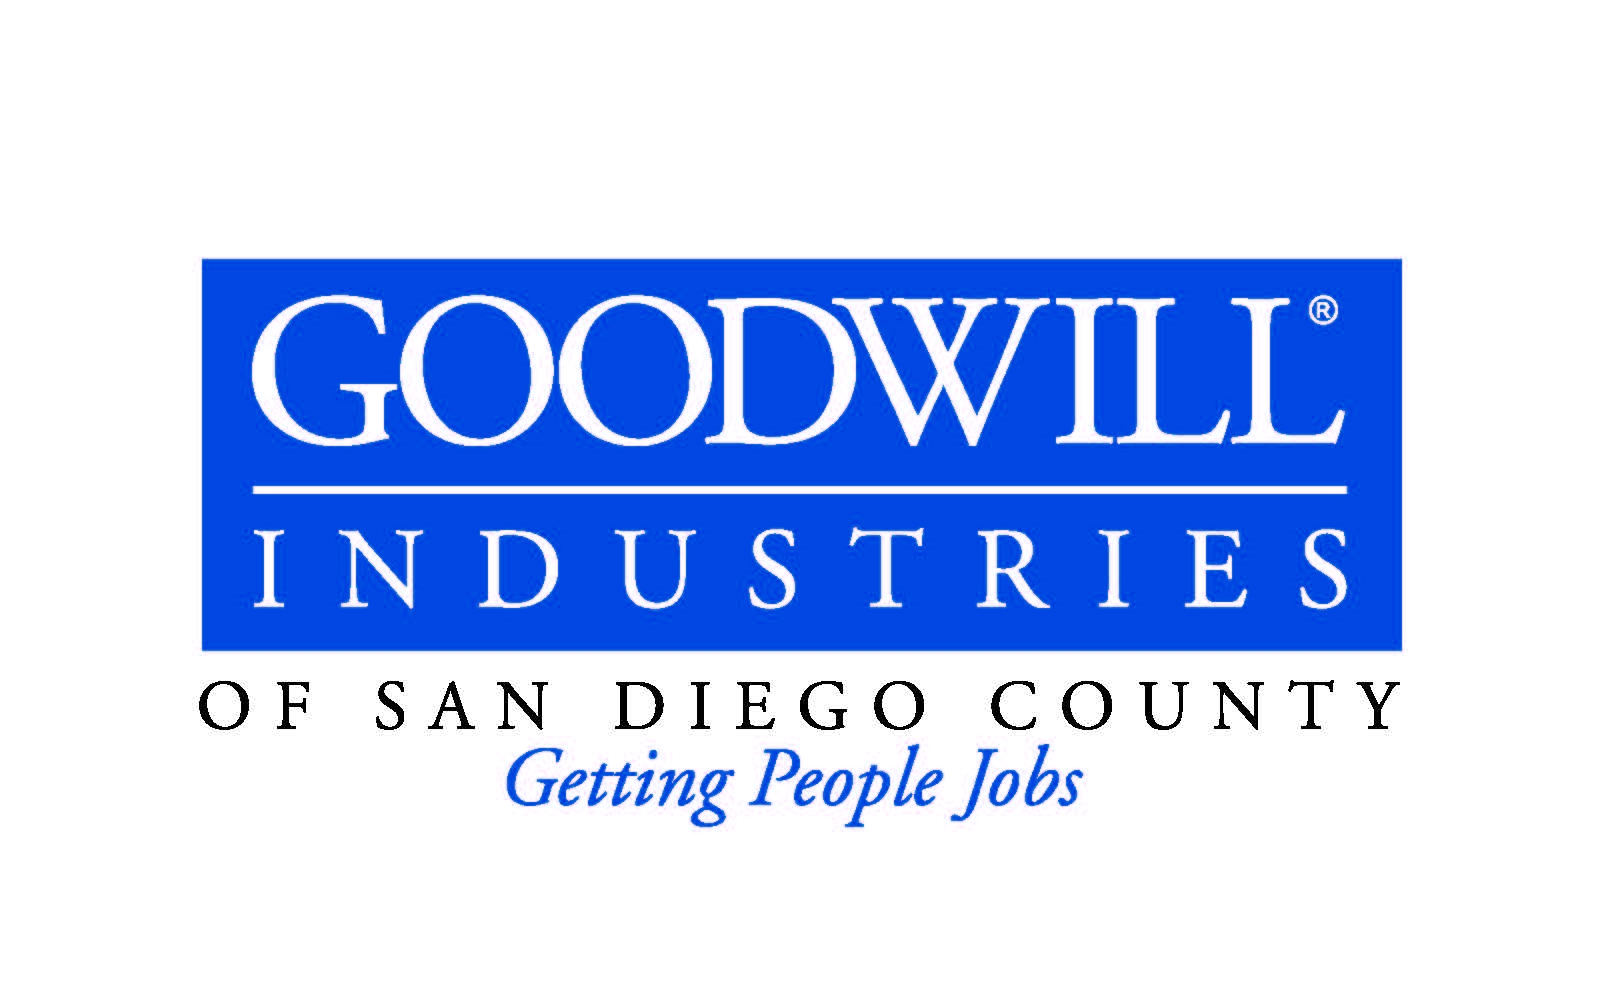 Goodwill Industries of San Diego County logo